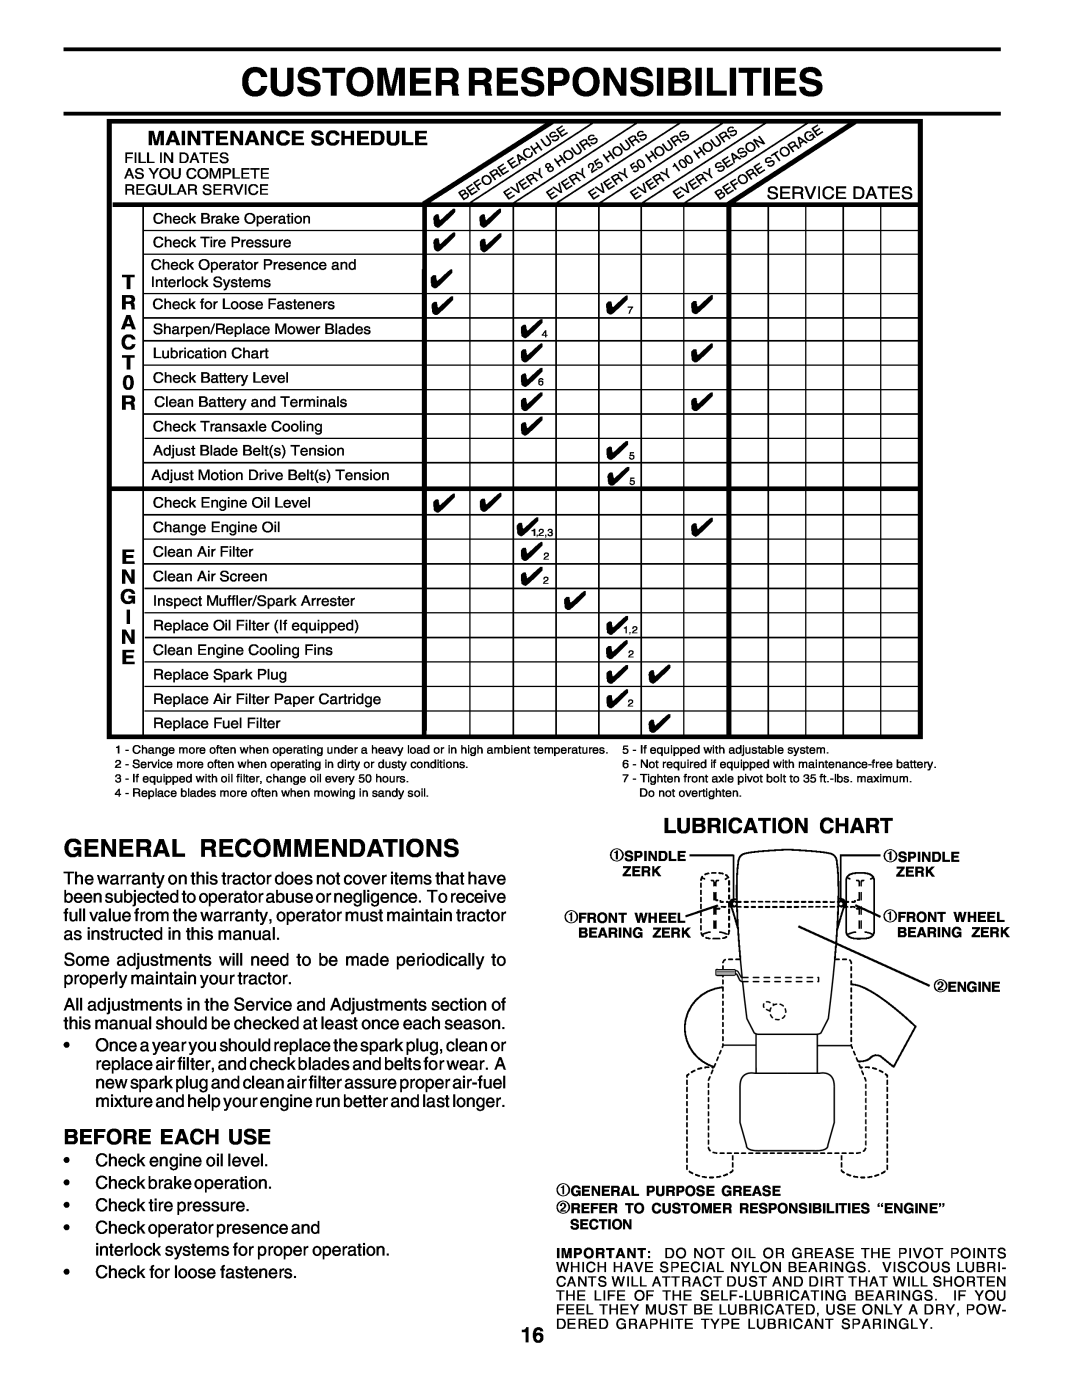 Poulan 180002 owner manual Customer Responsibilities, General Recommendations, ¿ Lubrication Chart, Before Each Use 